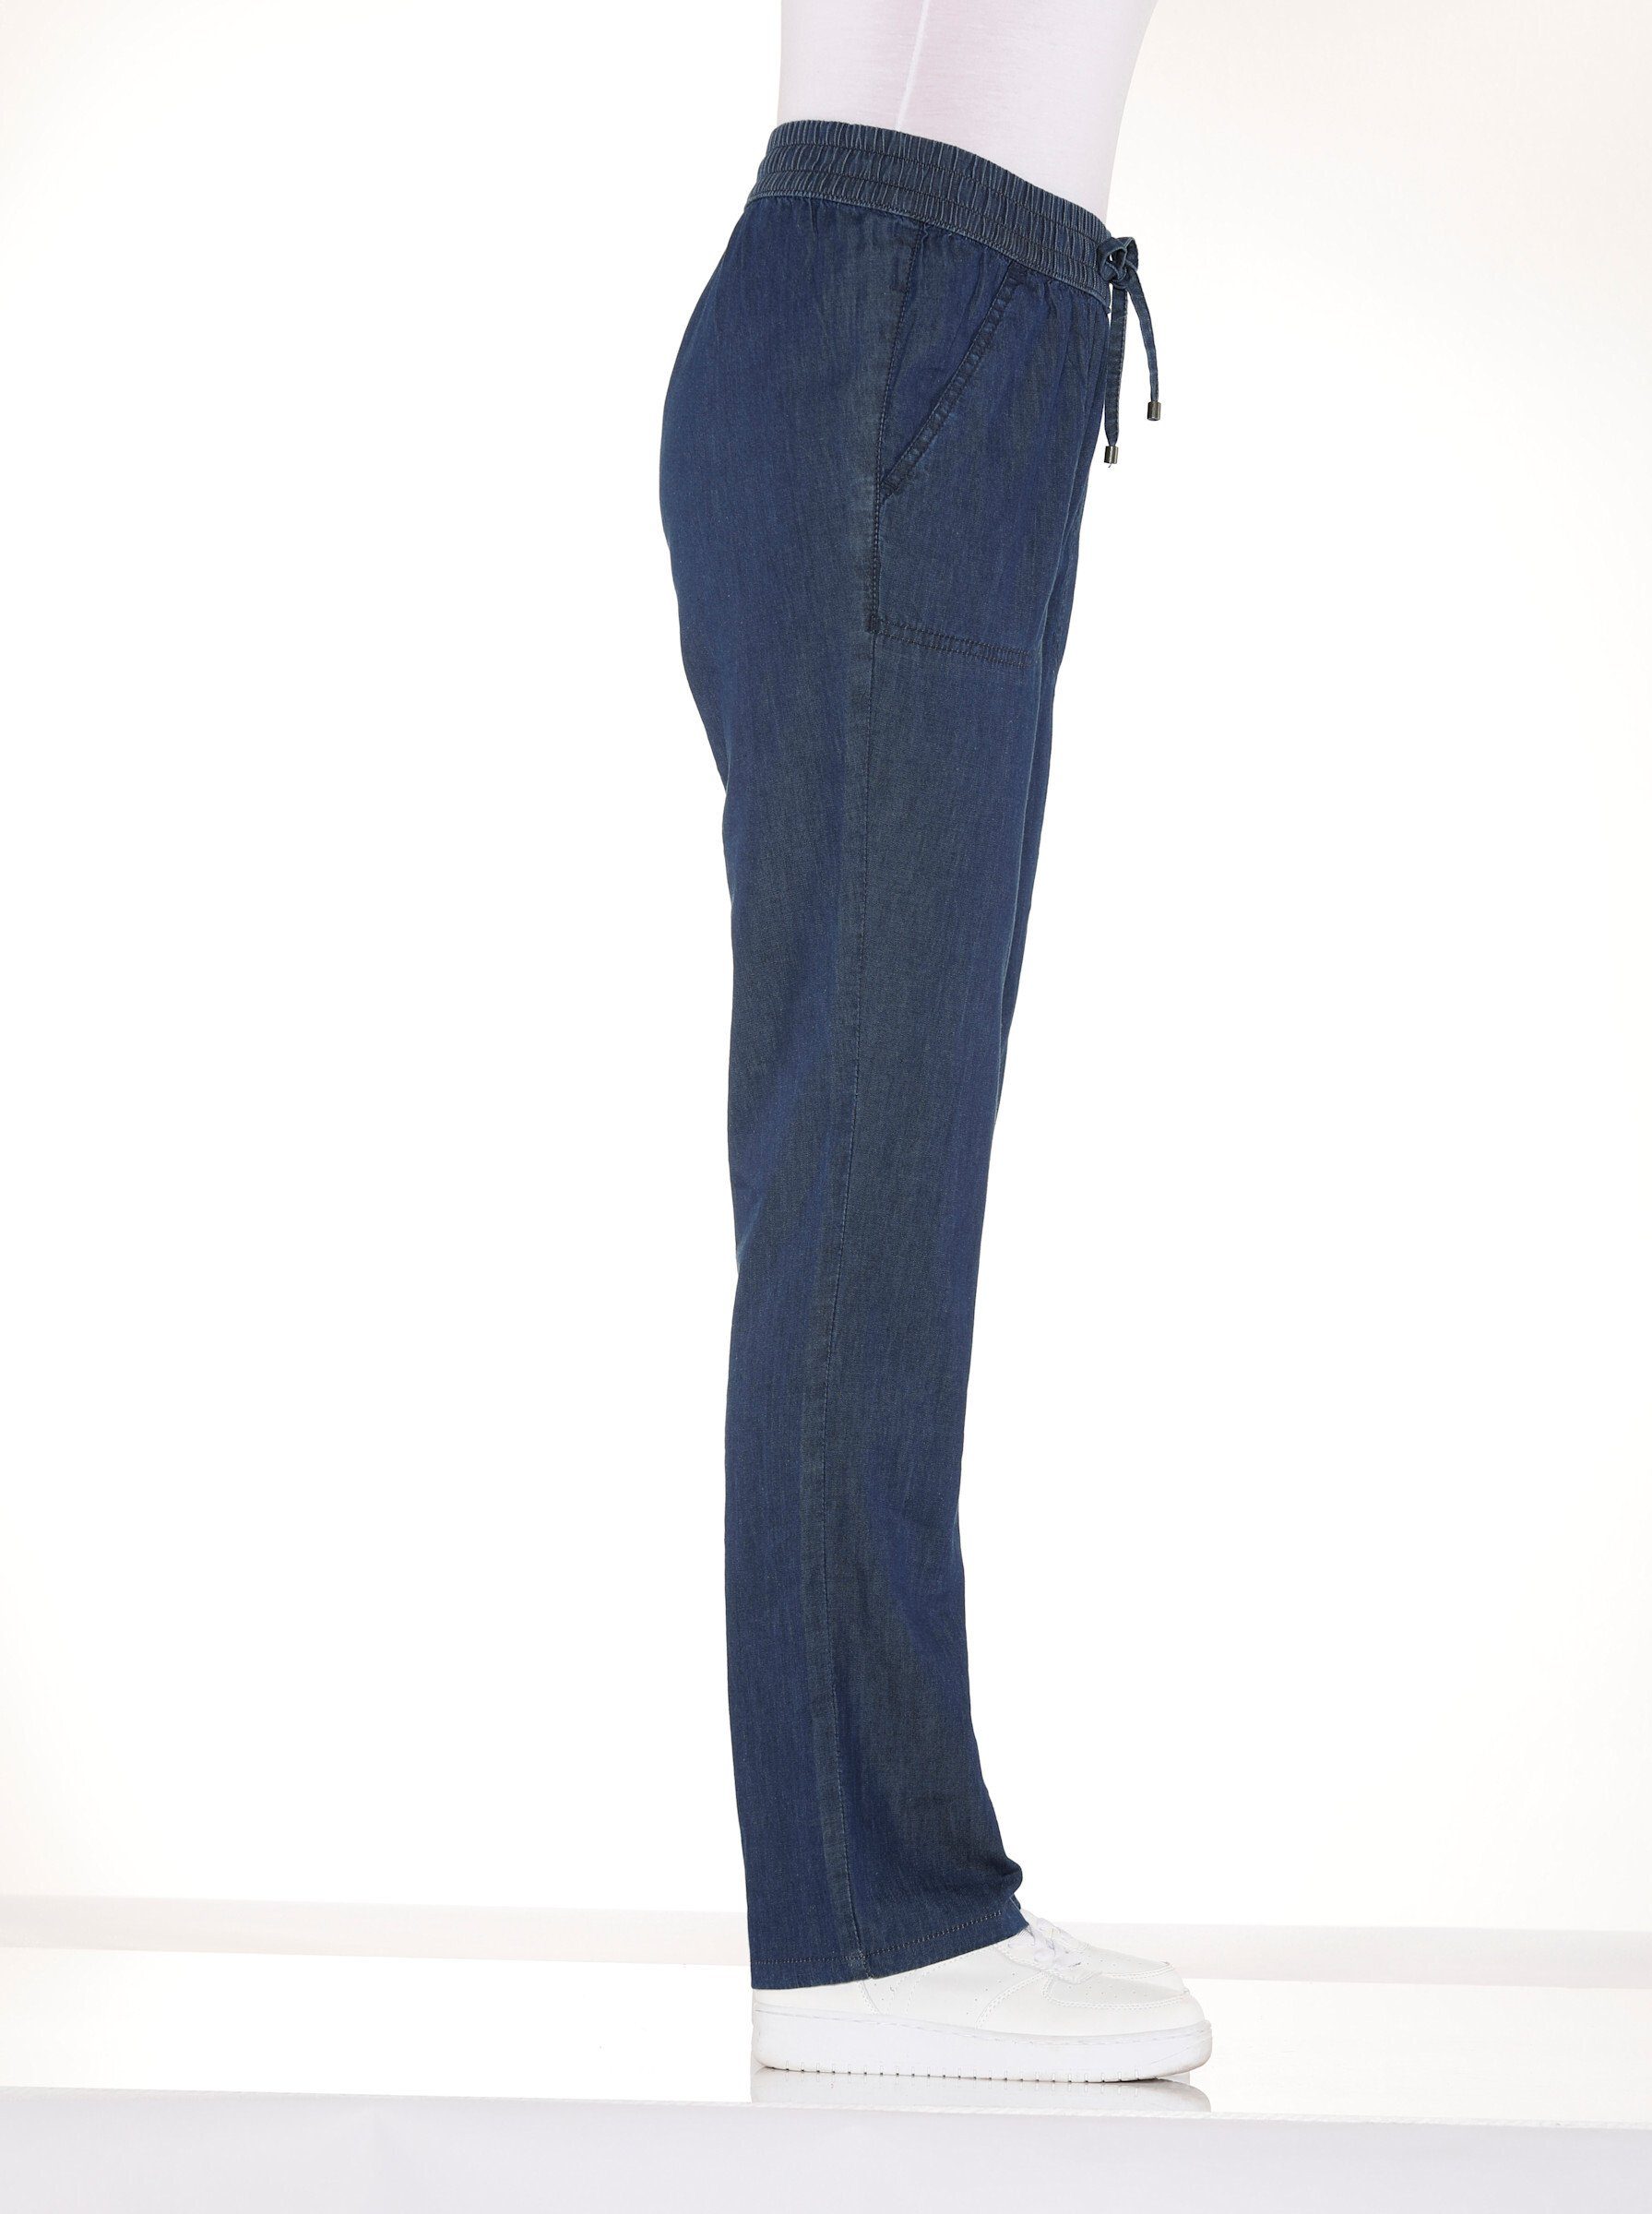 an! Sieh Jeans blue-stone-washed Bequeme